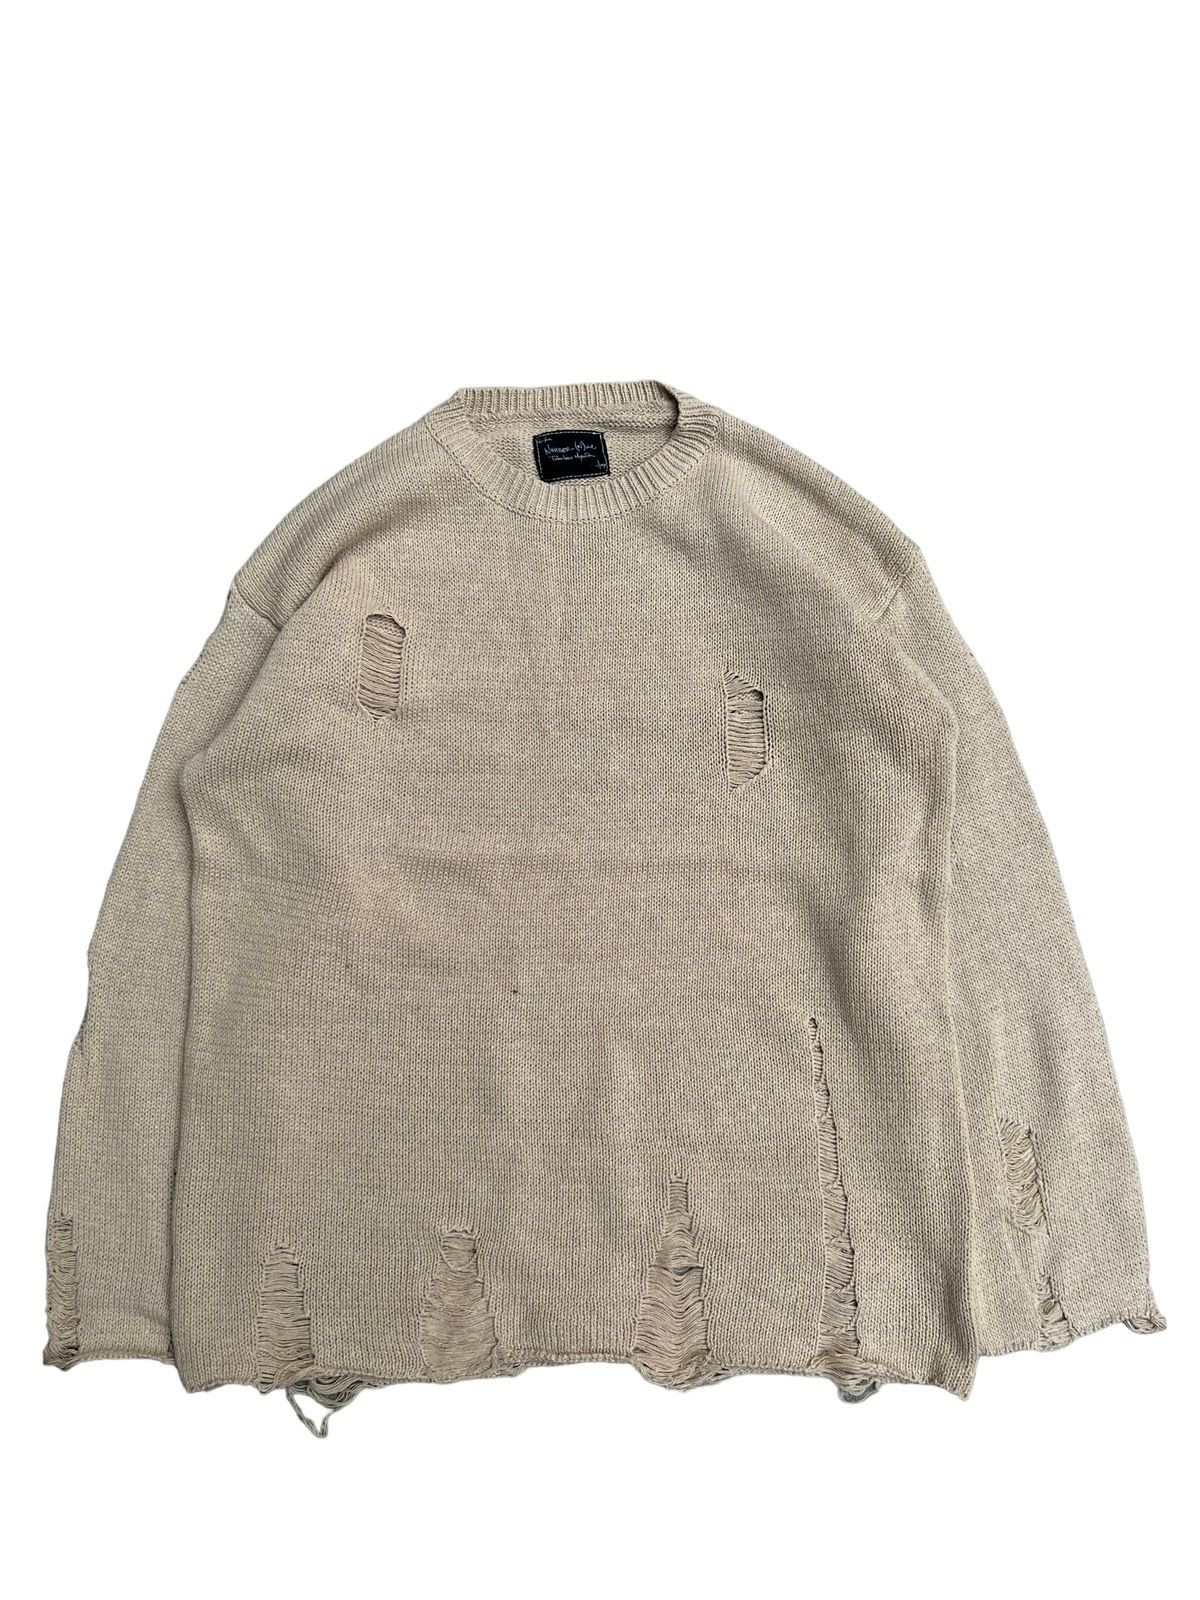 Pre-owned Number N Ine X Takahiromiyashita The Soloist Number Nine Distressed Grunge Knit Sweater In Light Khaki